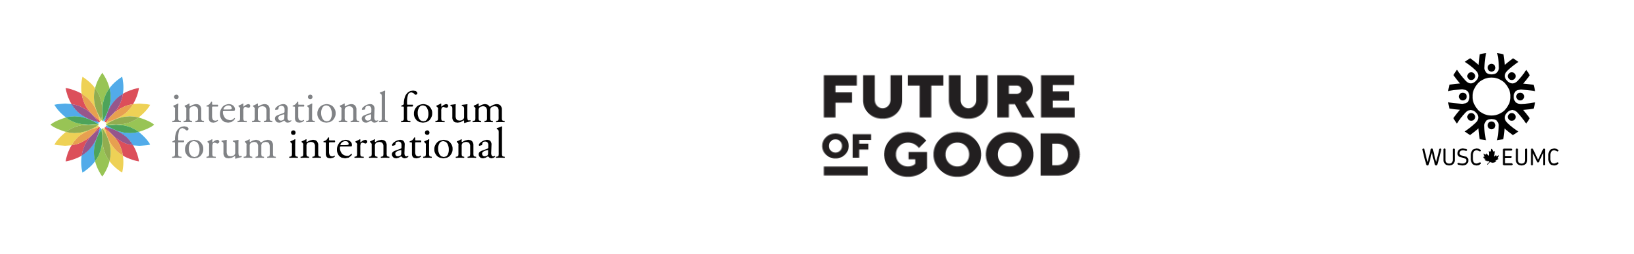 Logos of Future of Good partnership with WUSC and the International Forum